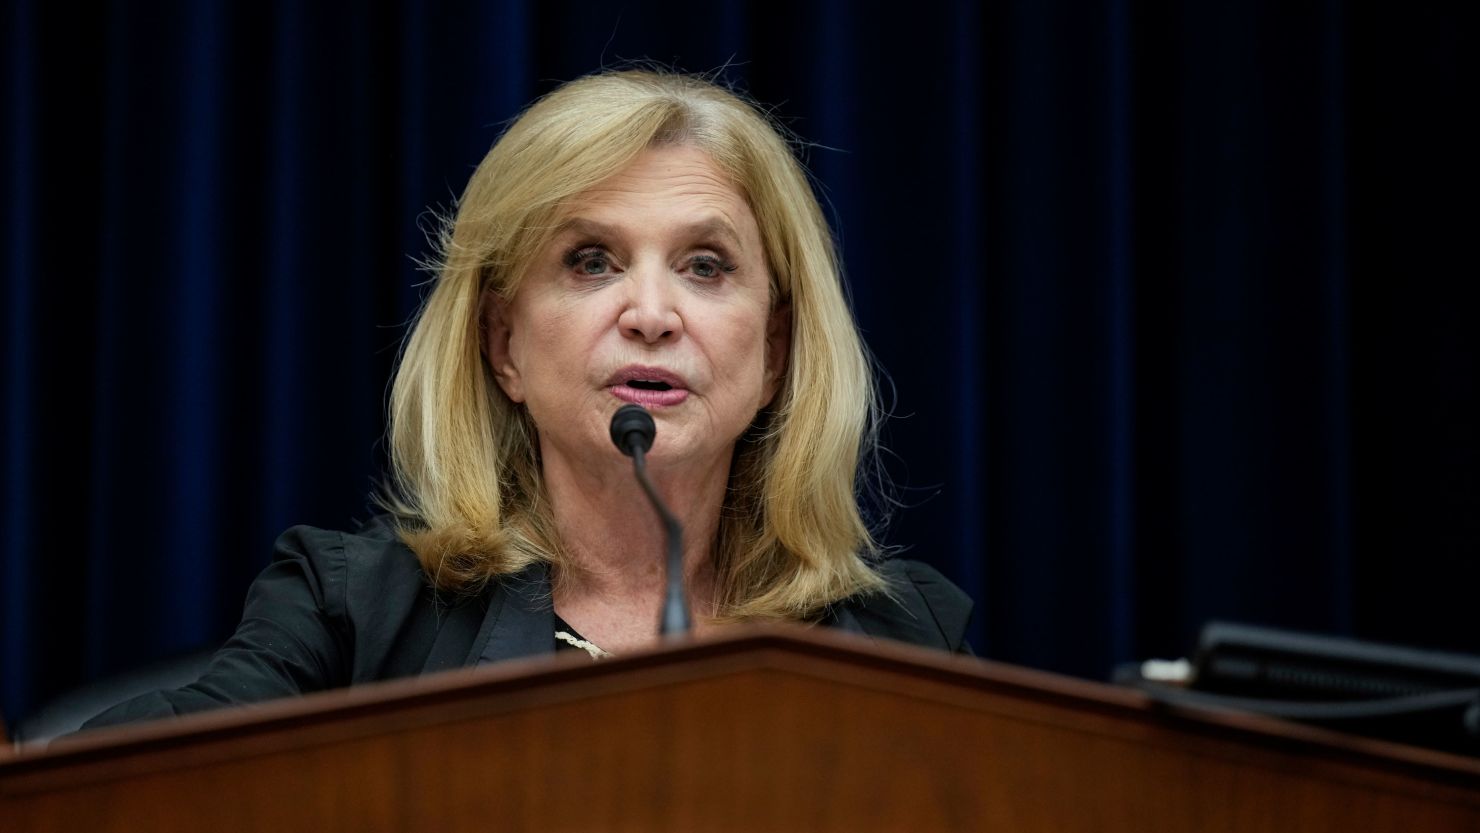 Rep. Carolyn Maloney speaks during a House Oversight Committee hearing on Capitol Hill on July 27, 2022 in Washington.